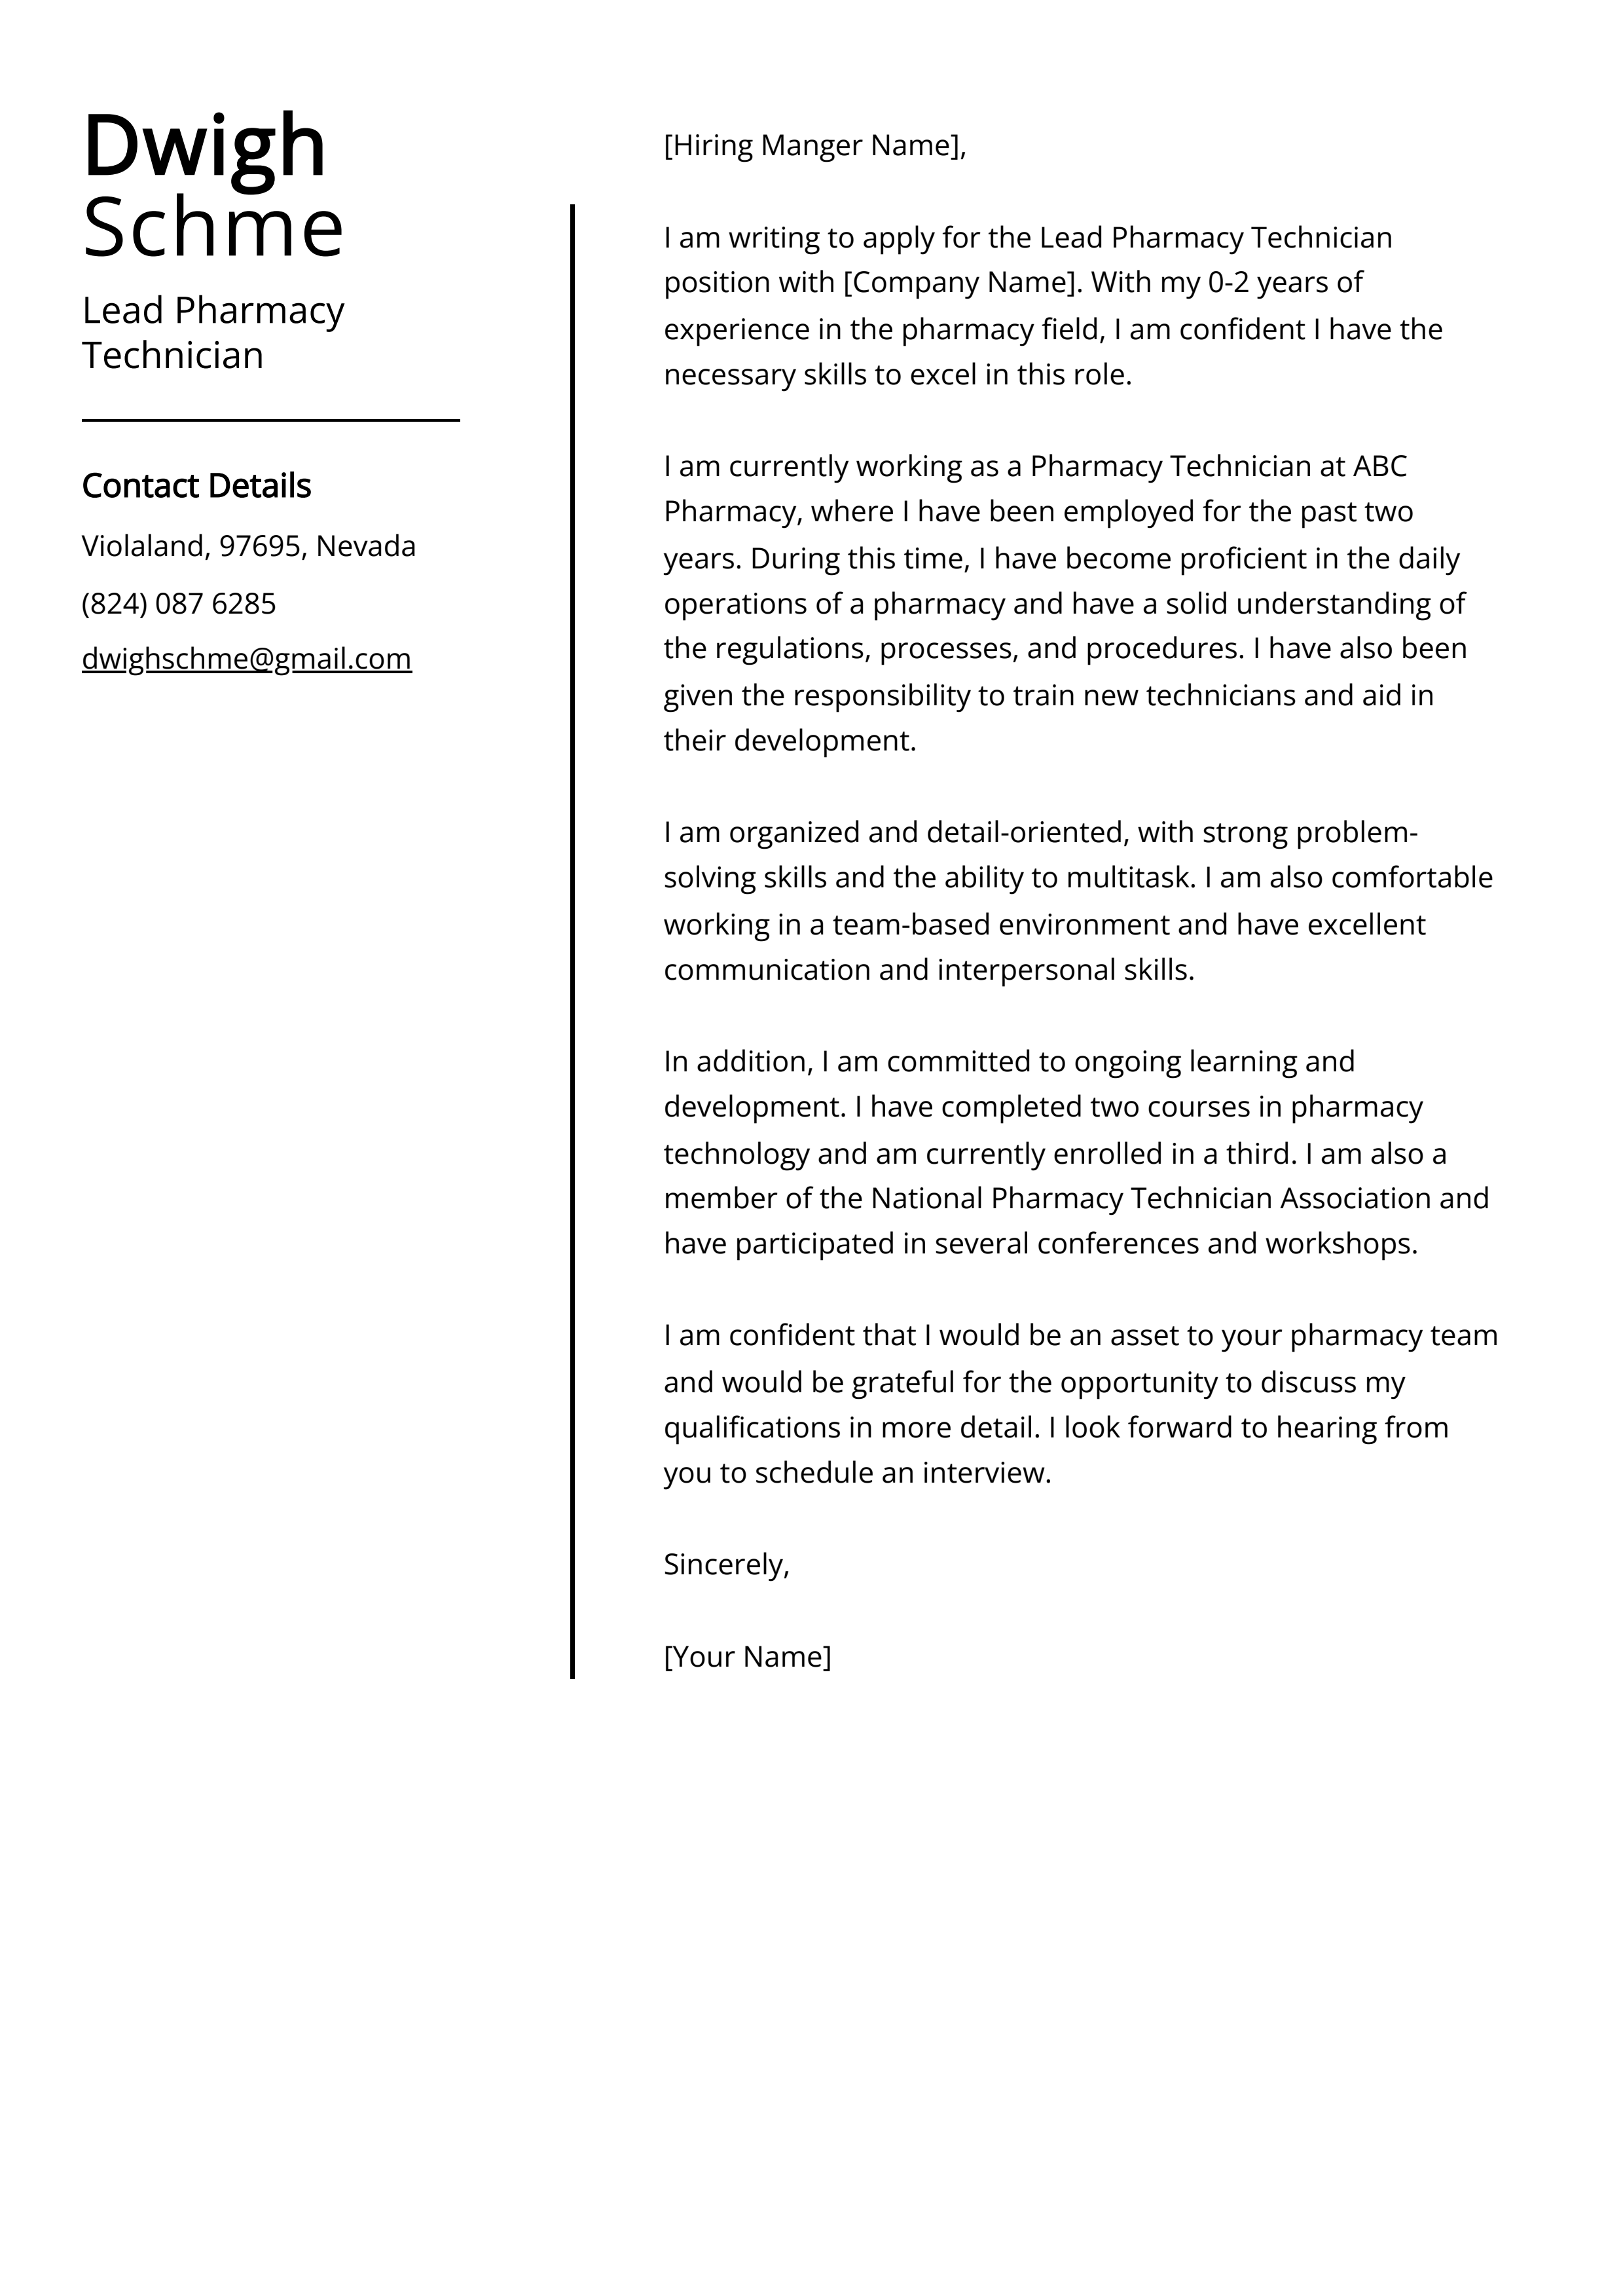 Lead Pharmacy Technician Cover Letter Example